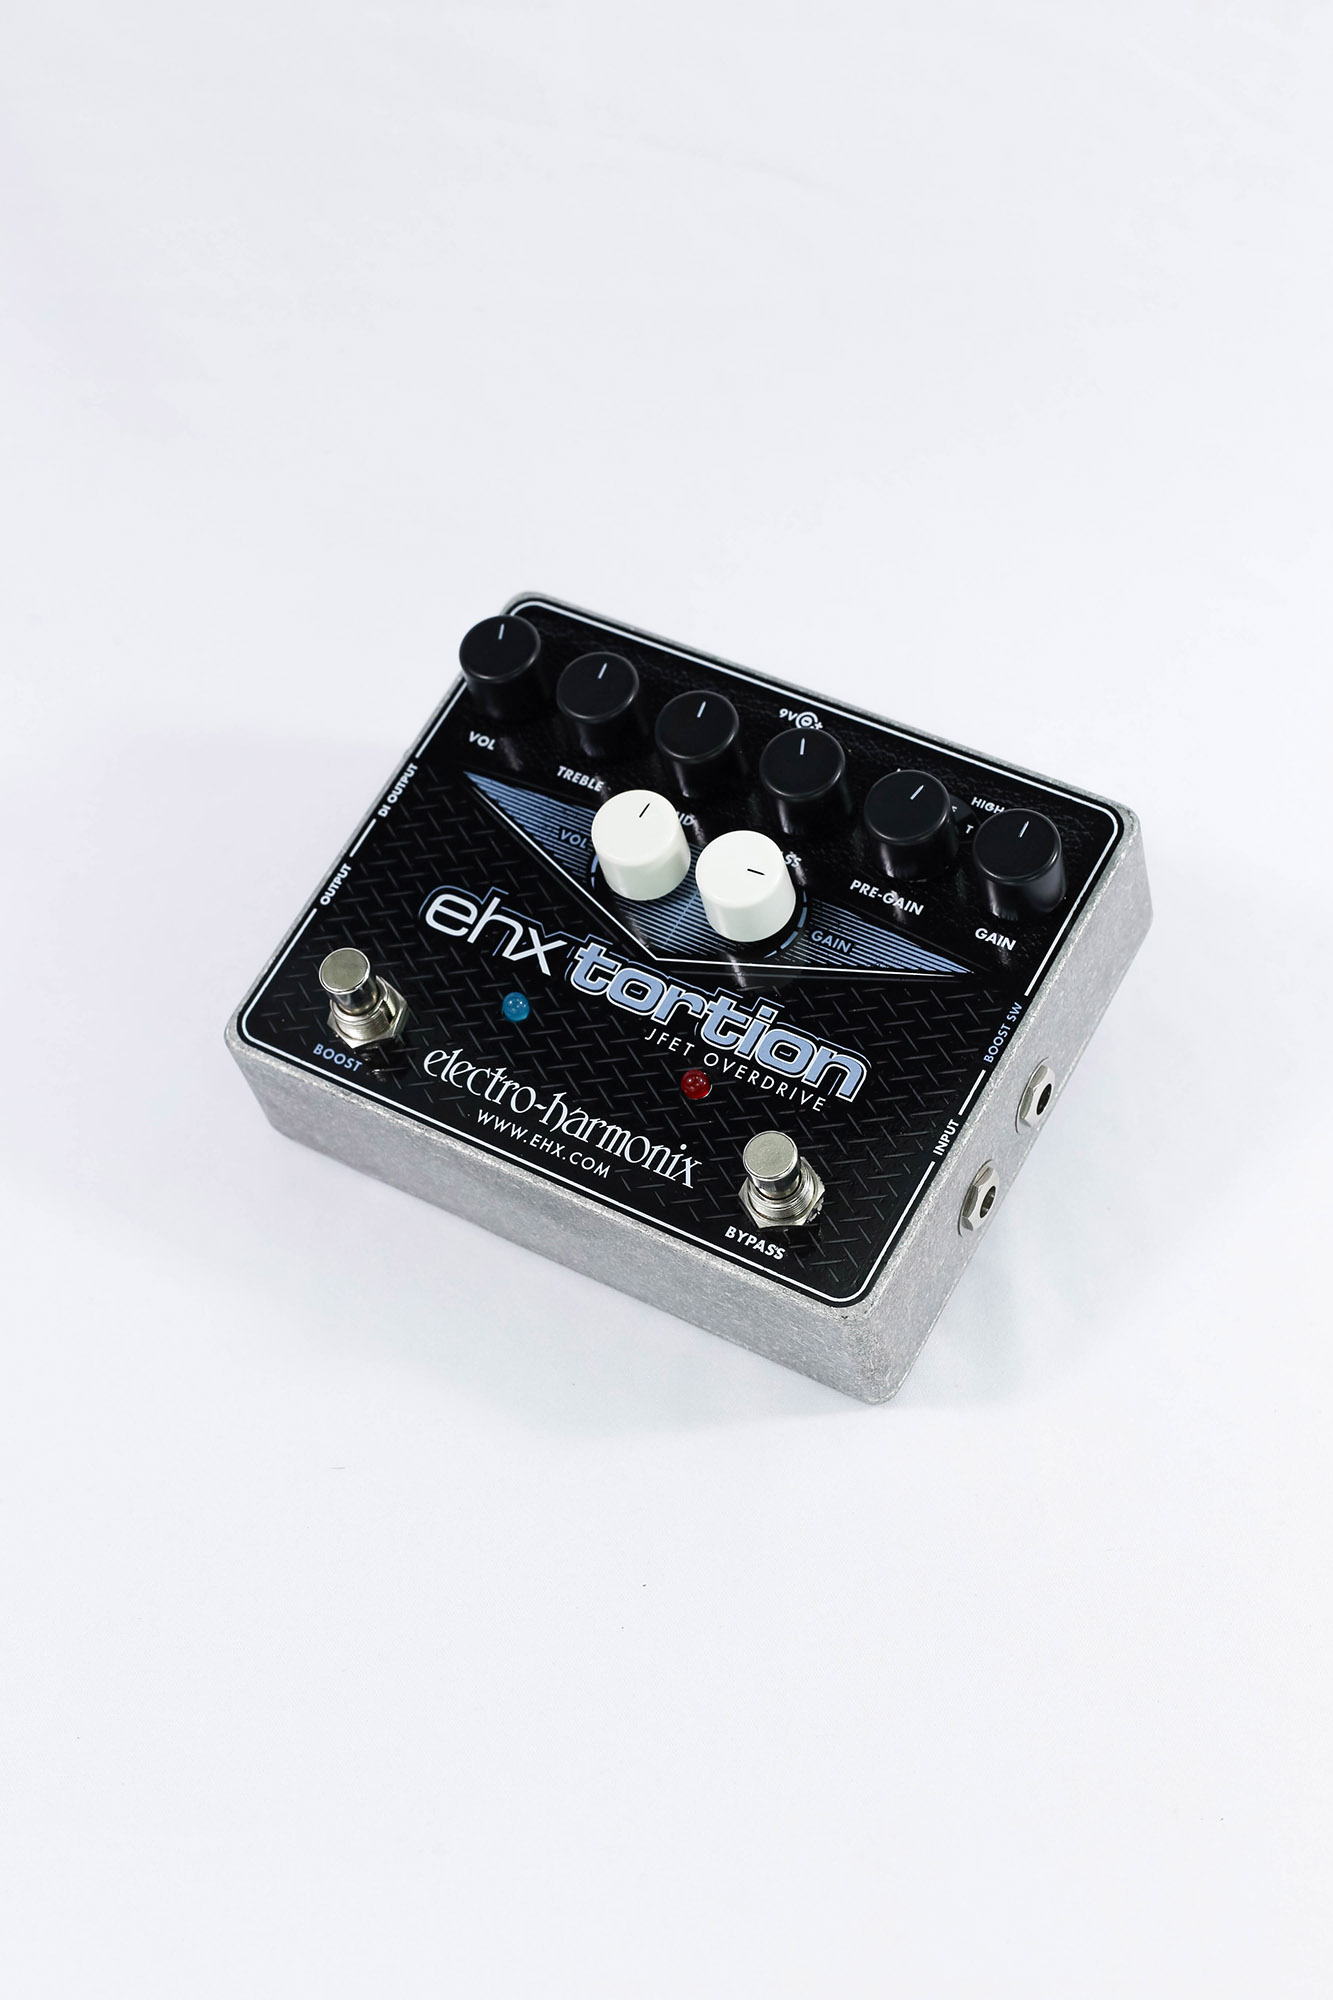 Pedal Electro-harmonix Ehx Tortion Jfet Overdrive Ehxtortion  - Grupo Solmaior